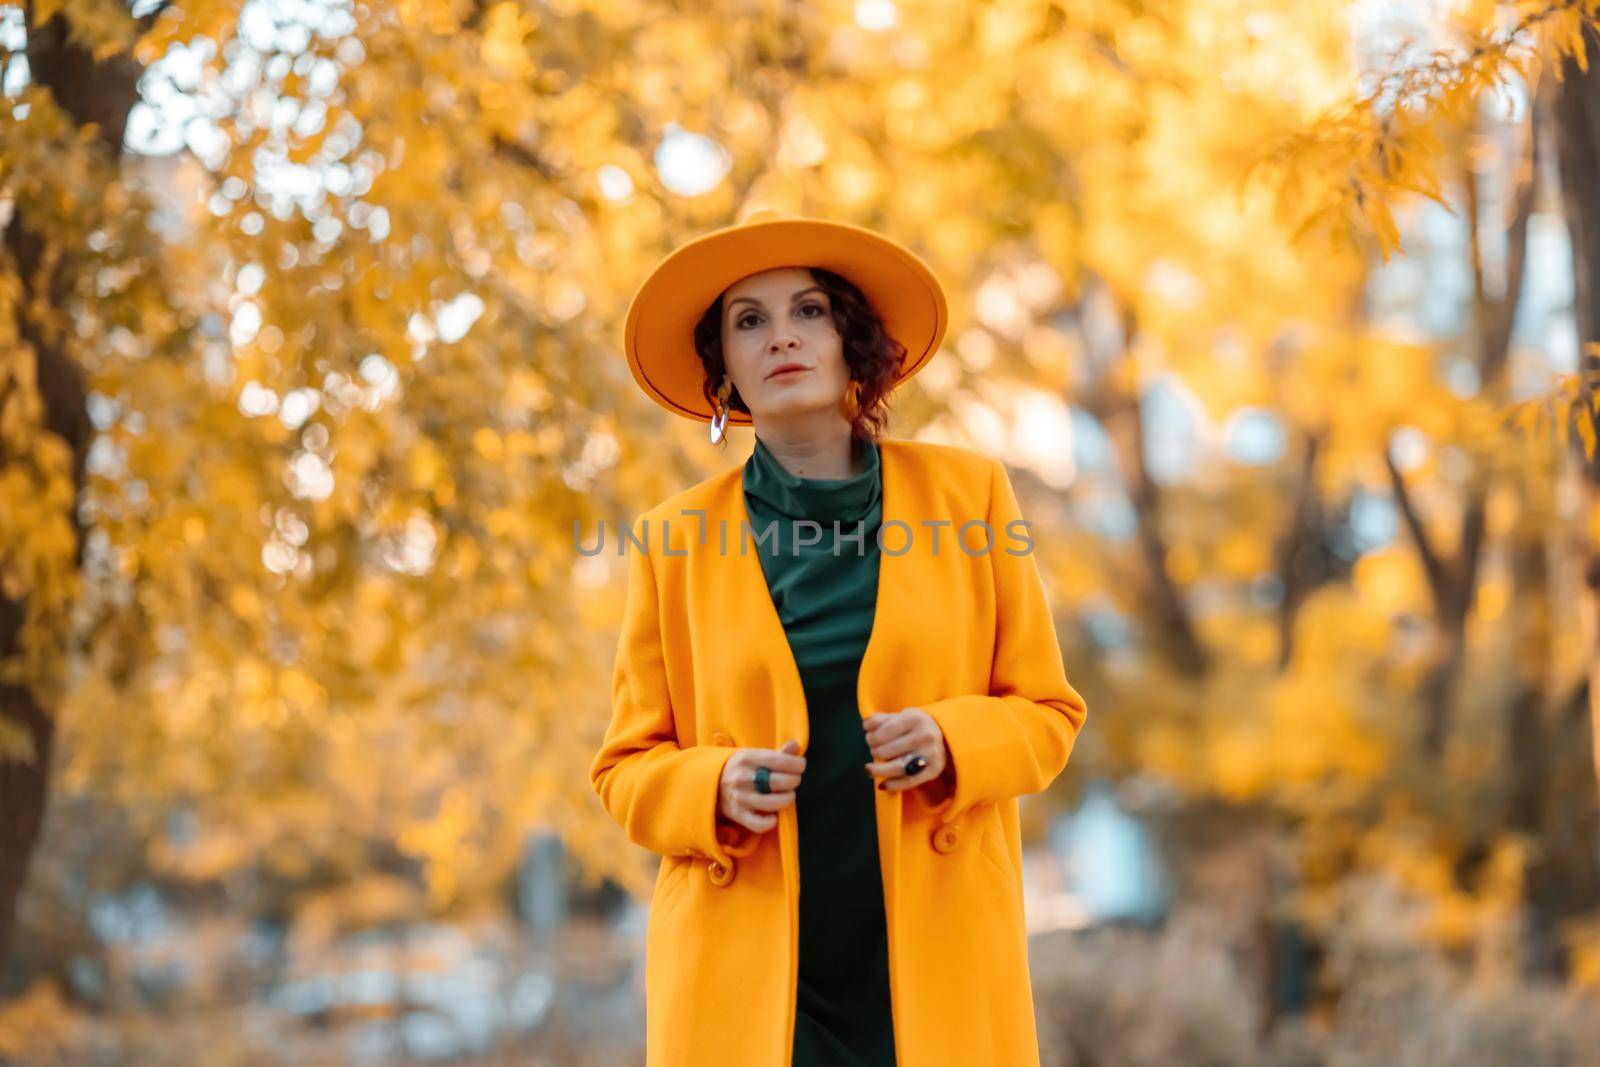 Beautiful woman walks outdoors in autumn. She is wearing a yellow coat, yellow hat and green dress. Young woman enjoying the autumn weather. Autumn content by Matiunina